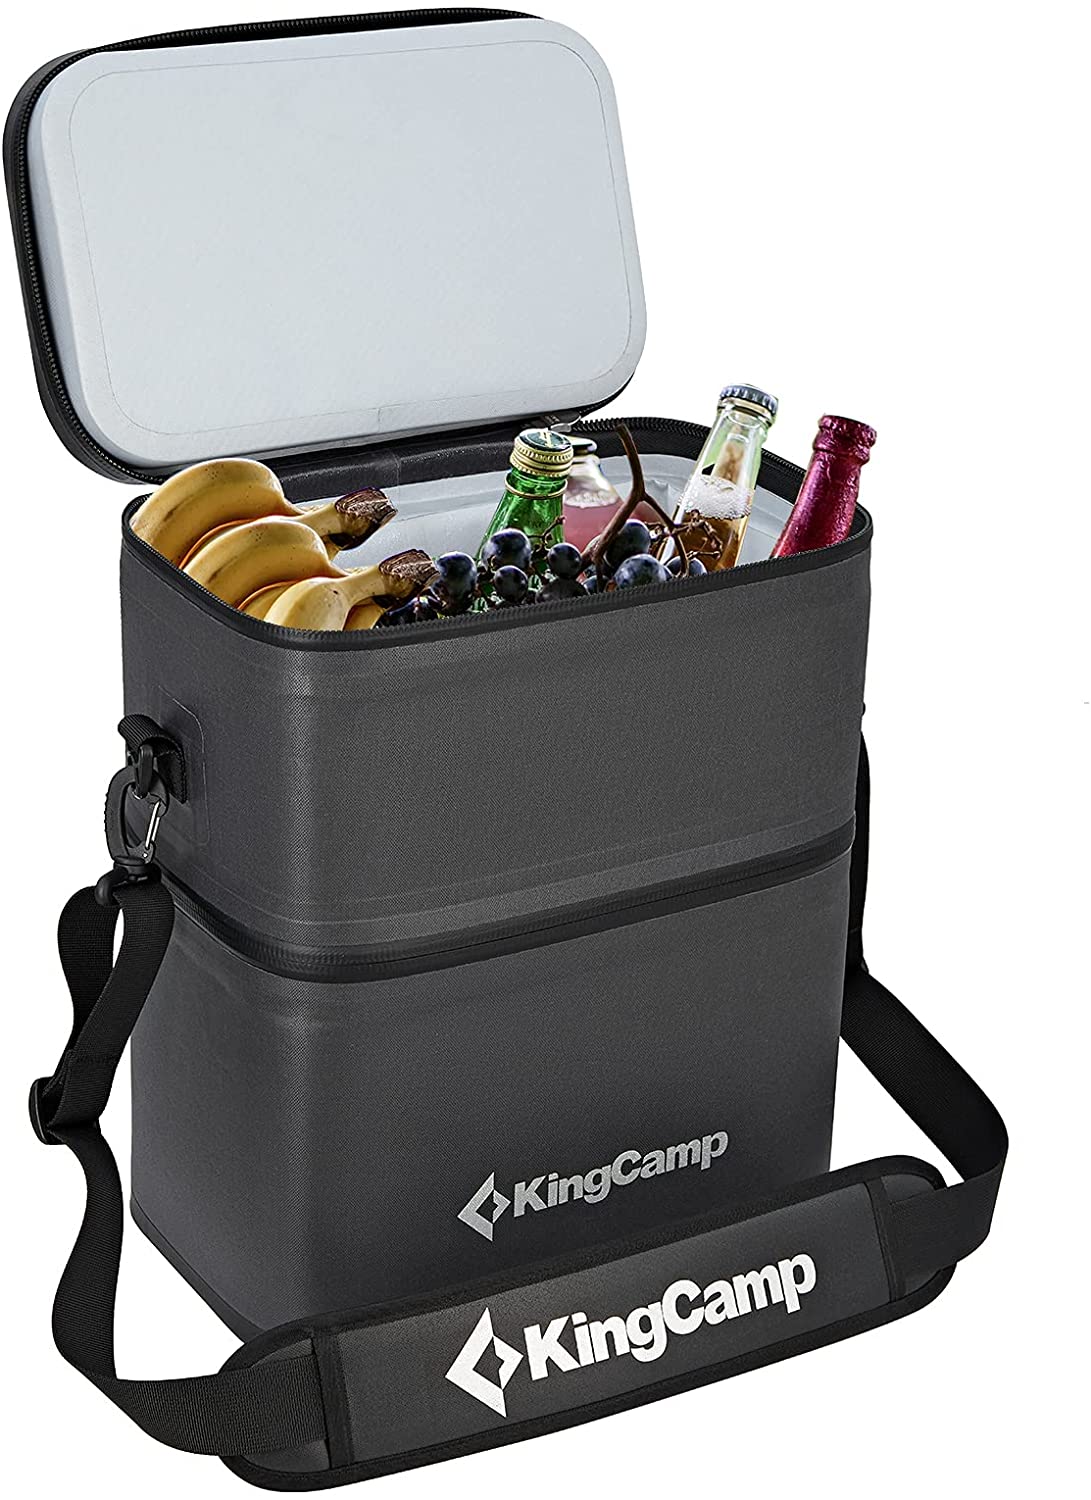 KingCamp Portable 16 Cans Double Layer Cooler Bag